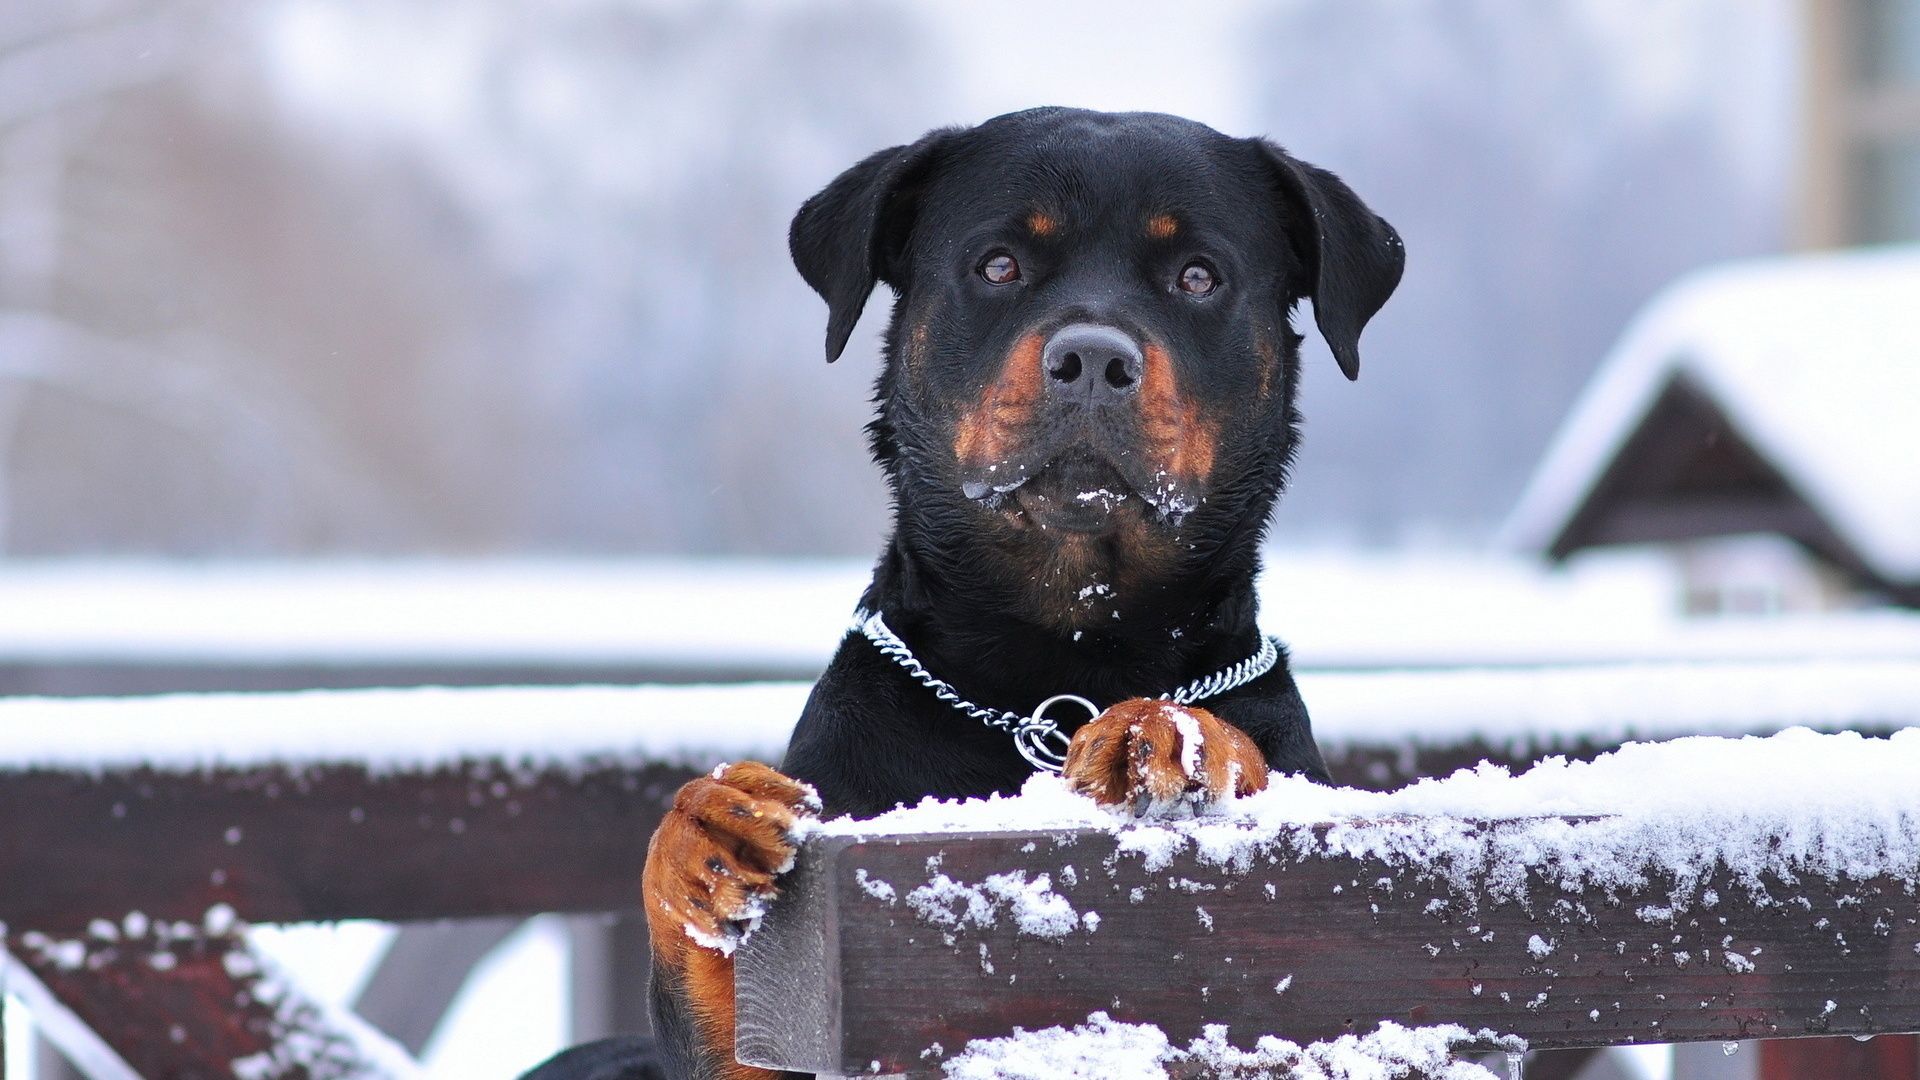 The Rottweiler In The Snow